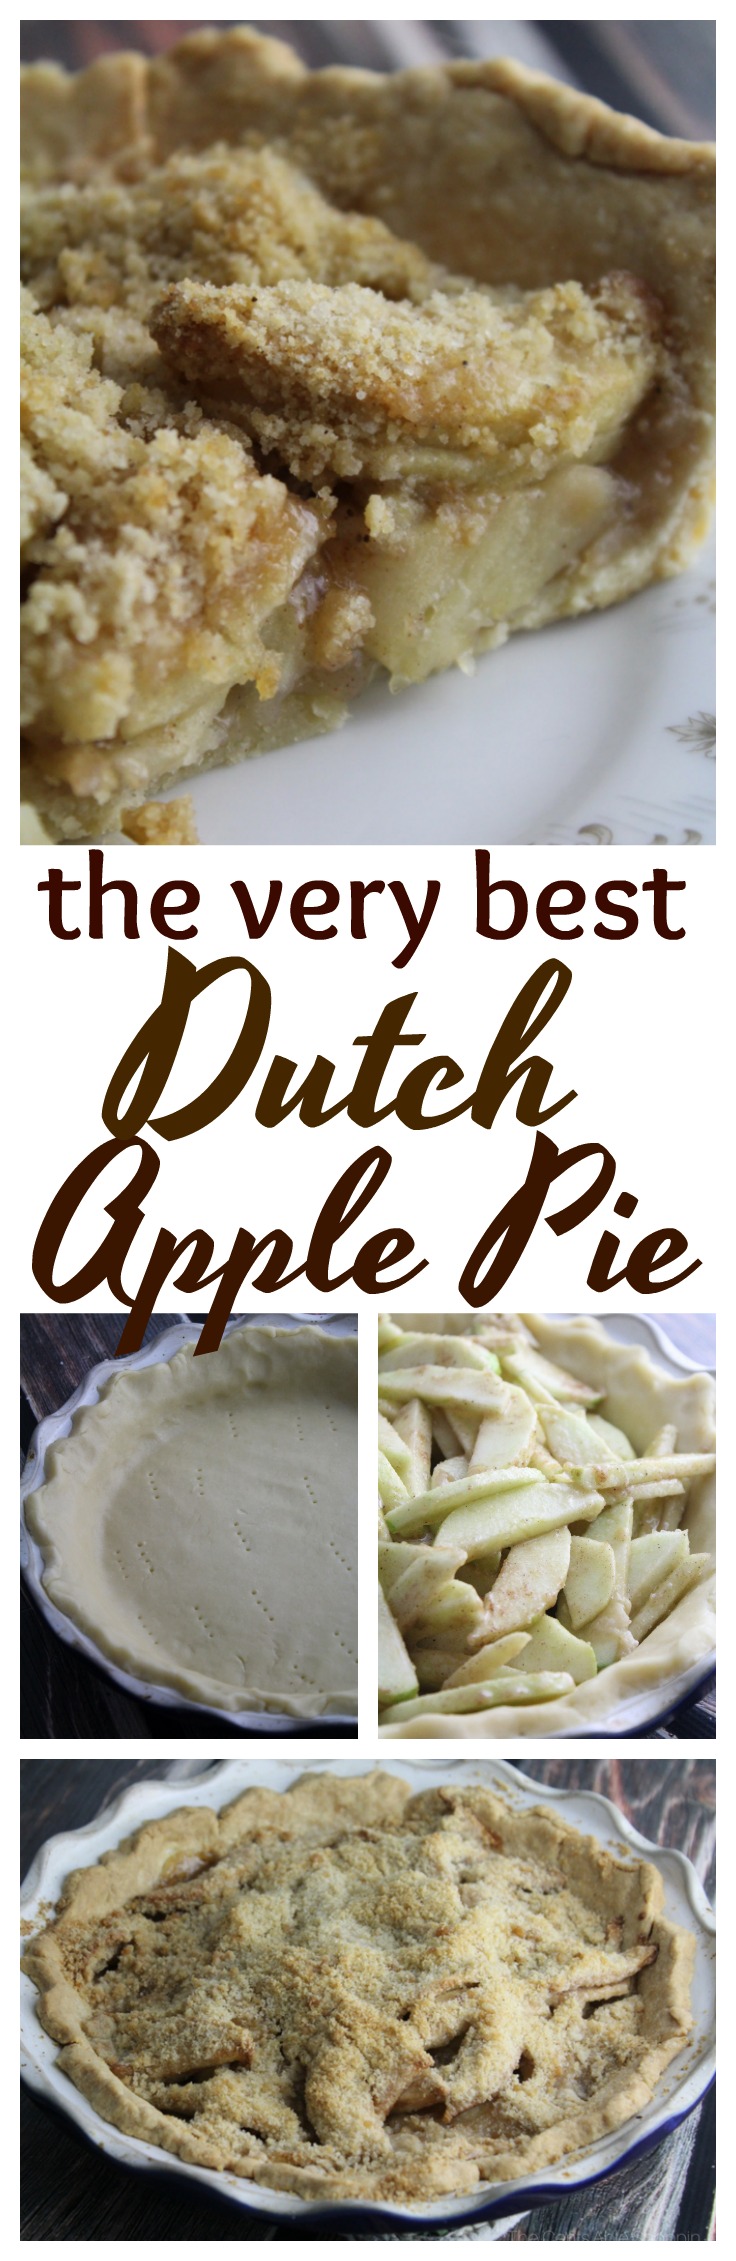 Cooler fall weather is not complete without apple pie - this Dutch Apple Pie is one of the best you will ever eat!